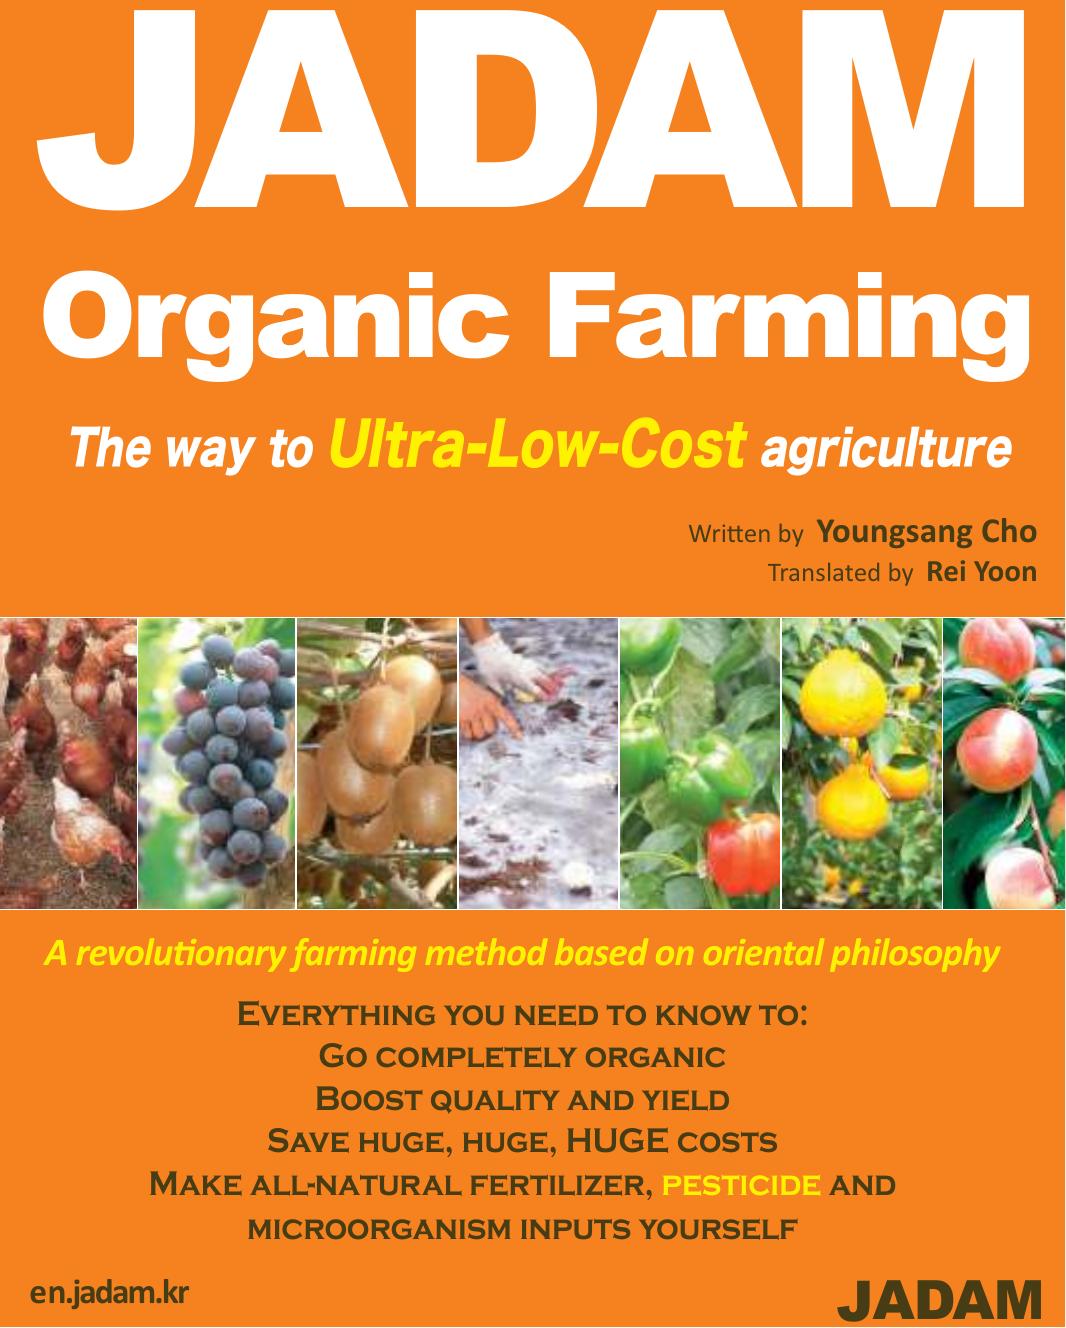 JADAM Organic Farming & Gardening : The Way to Ultra-Low-Cost Agriculture, Make All-Natural Fertilizer, Pesticide and Microorganism Inputs Yourself